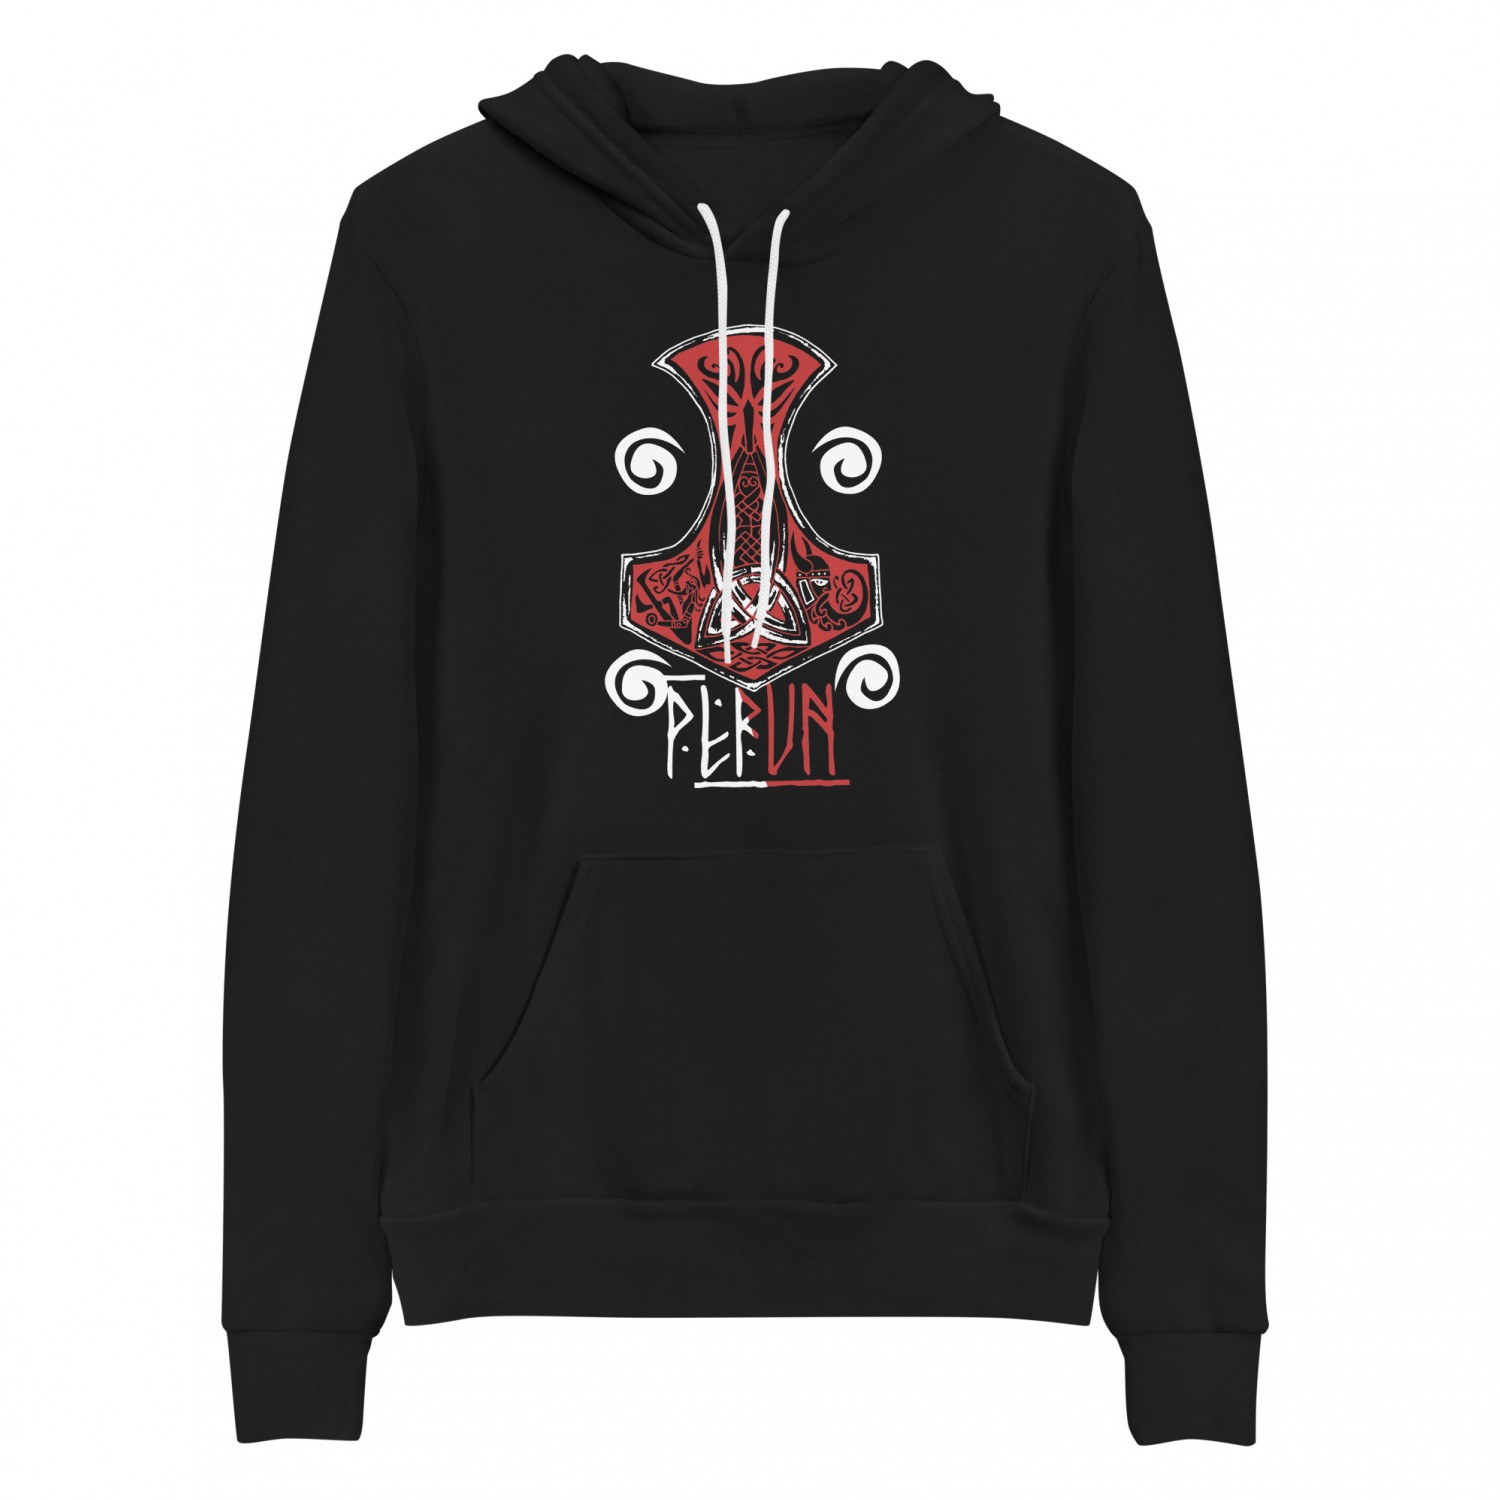 Buy Hoodie with Perun's ax